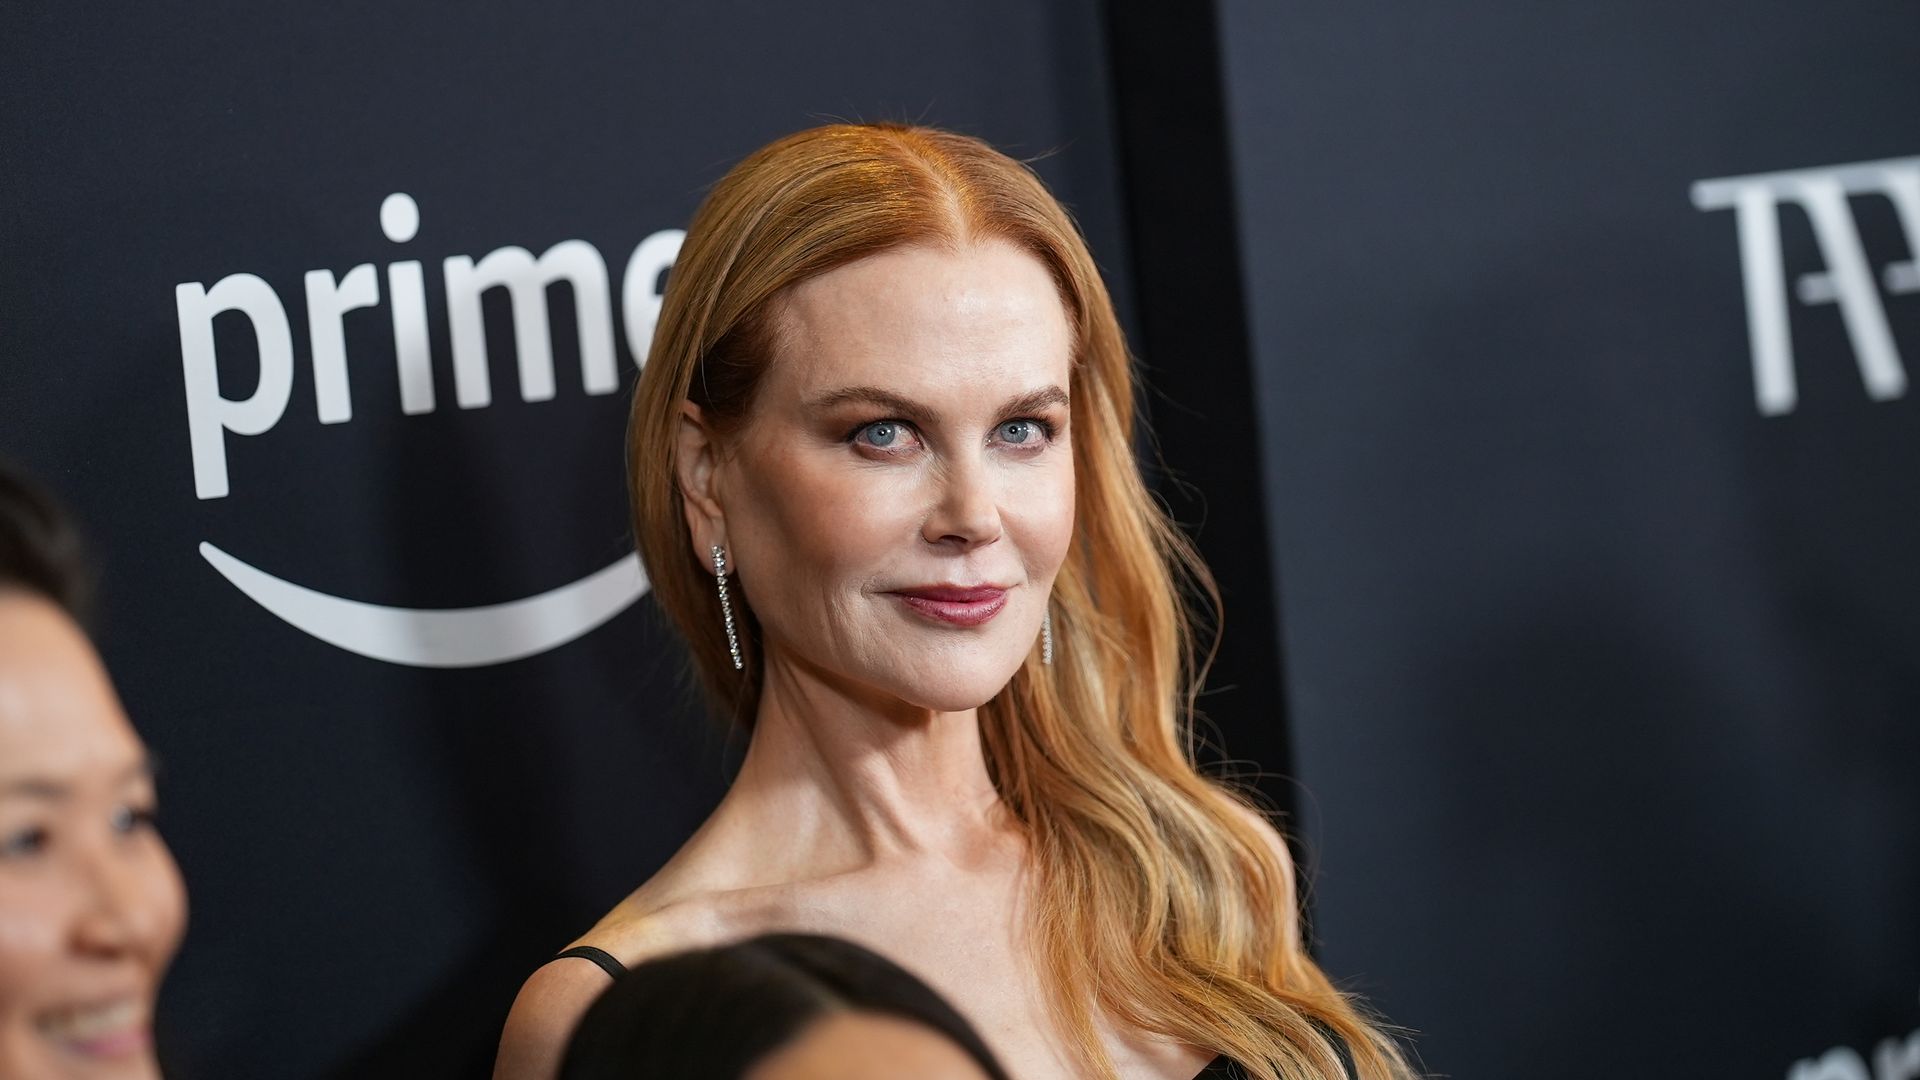 NEW YORK, NEW YORK - JANUARY 21: Nicole Kidman attends Prime Video's "Expats" New York premiere at The Museum of Modern Art on January 21, 2024 in New York City. (Photo by John Nacion/WireImage)